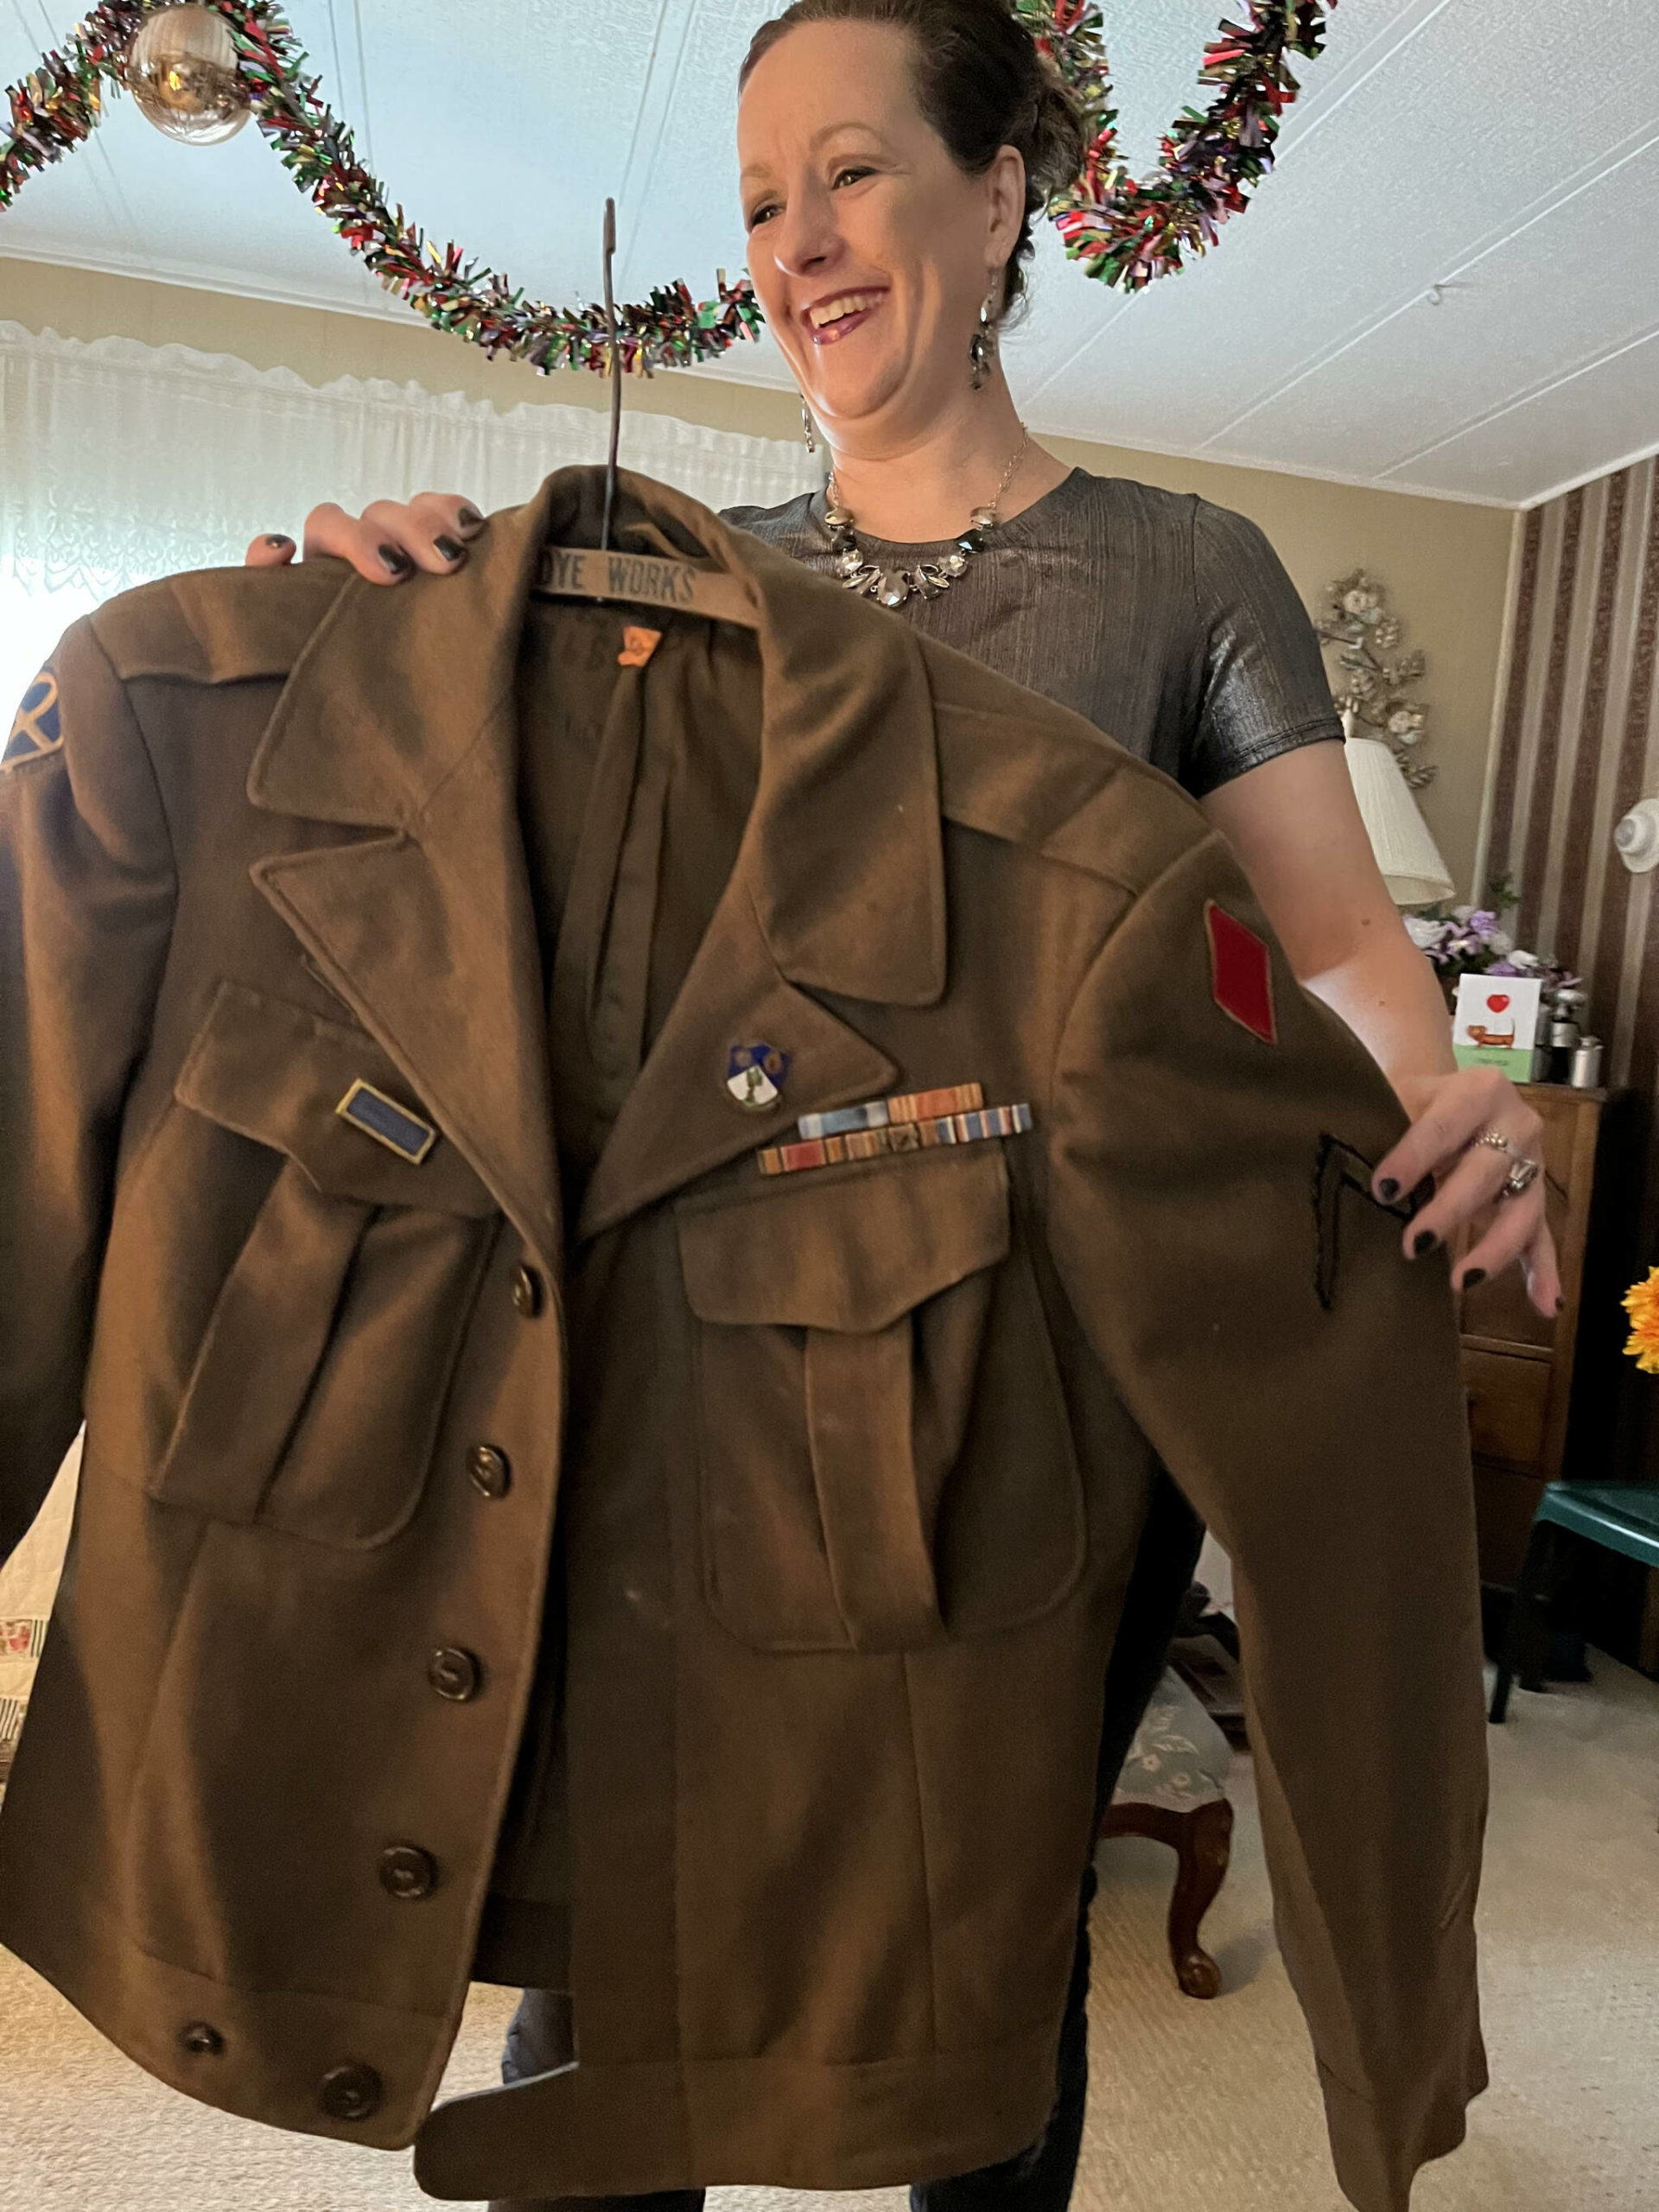 Matthew N. Wells | The Daily World 
Jeri Bogar, proud as can be, brings out the U.S. Army uniform for her 97-year-old grandfather Harold Ralkey, Friday, Nov. 26, 2021, in Ralkey’s mobile home in Elma. The disabled veteran Ralkey served in the 5th Infantry Division in World War II. “He is the bravest and best man I know,” Bogar said.